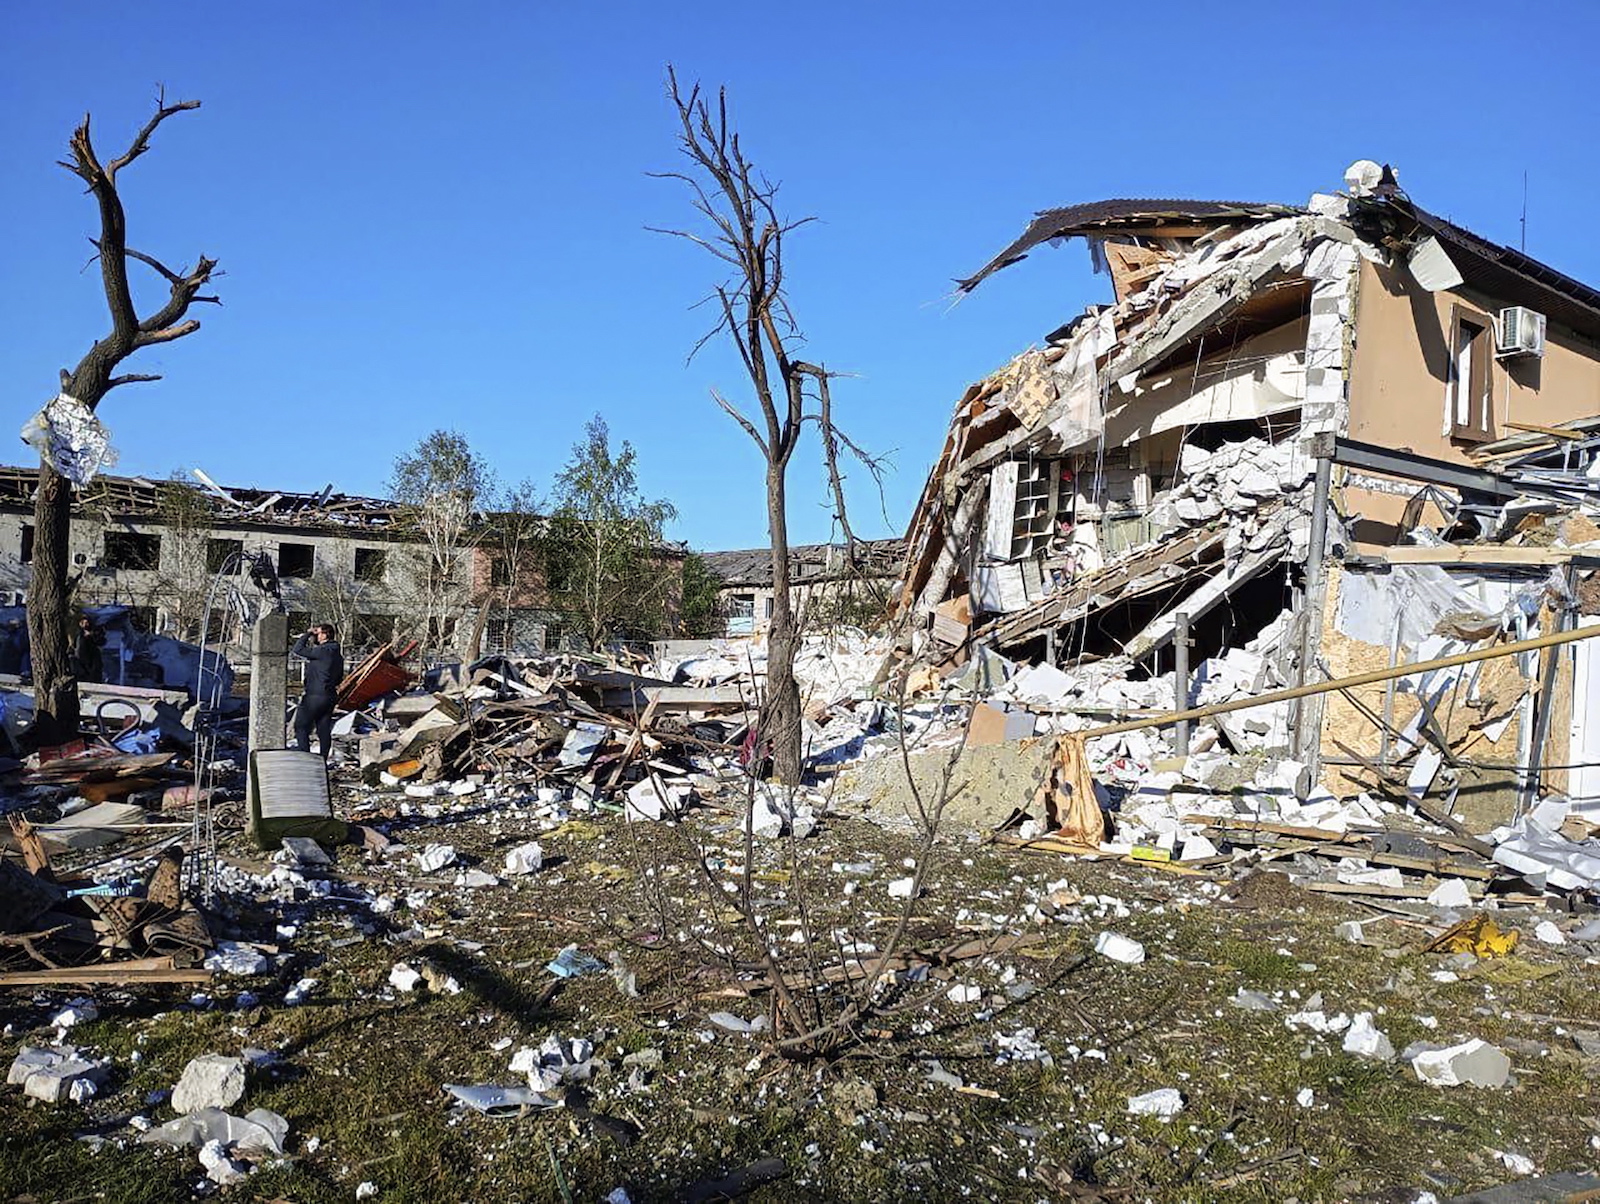 epa10672012 A handout photo made available by the Governor of Dnipropetrovsk Oblast Serhiy Lysak shows the aftermath of a rocket hit in the Dnipro area, central Ukraine, 04 June 2023, amid the Russian invasion. According to the State Emergency Service (SES) of Ukraine, a 2-years old girl died and 22 people were injured, including 5 children, as a result of a Russian rocket attack in the Dnipro area on the evening of 03 June.  EPA/DNIPROPETROVSK REGIONAL STATE ADMINISTRATION / HANDOUT  HANDOUT EDITORIAL USE ONLY/NO SALES